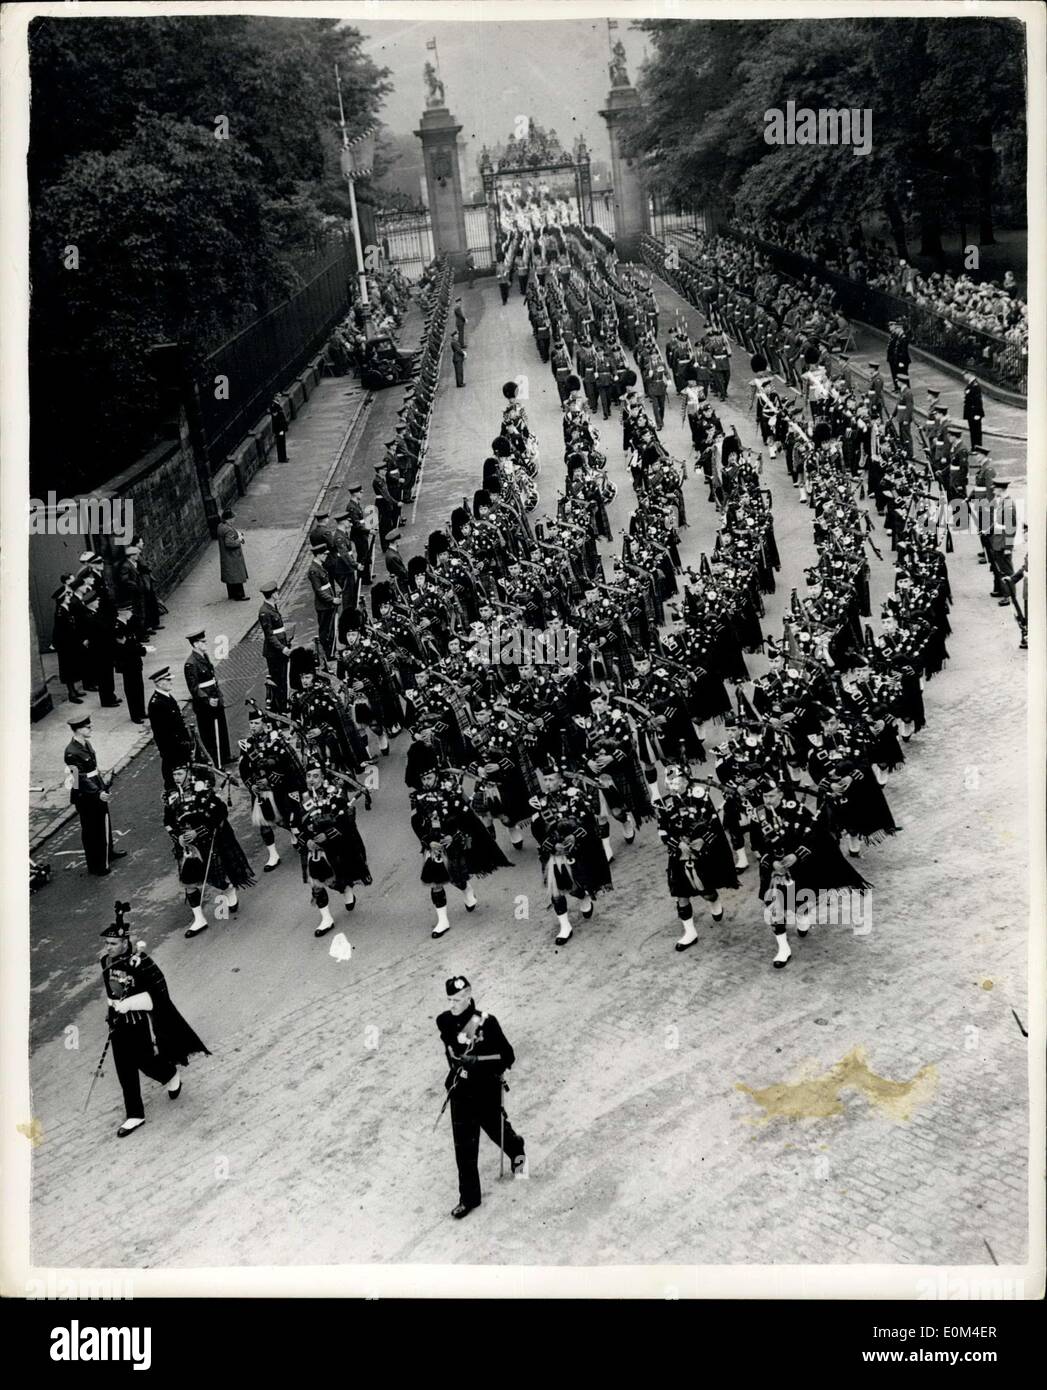 Jun. 25, 1953 - Royal visit to Scotland: H.M The Queen and The Duke of Edinburgh who are paying a State visit to Scotland, yesterday attended a National Service of Thanksgiving at St. Giles Cathedral. Photo shows: General view showing pipers and troops in the State procession as it left Holyroodhouse. Stock Photo